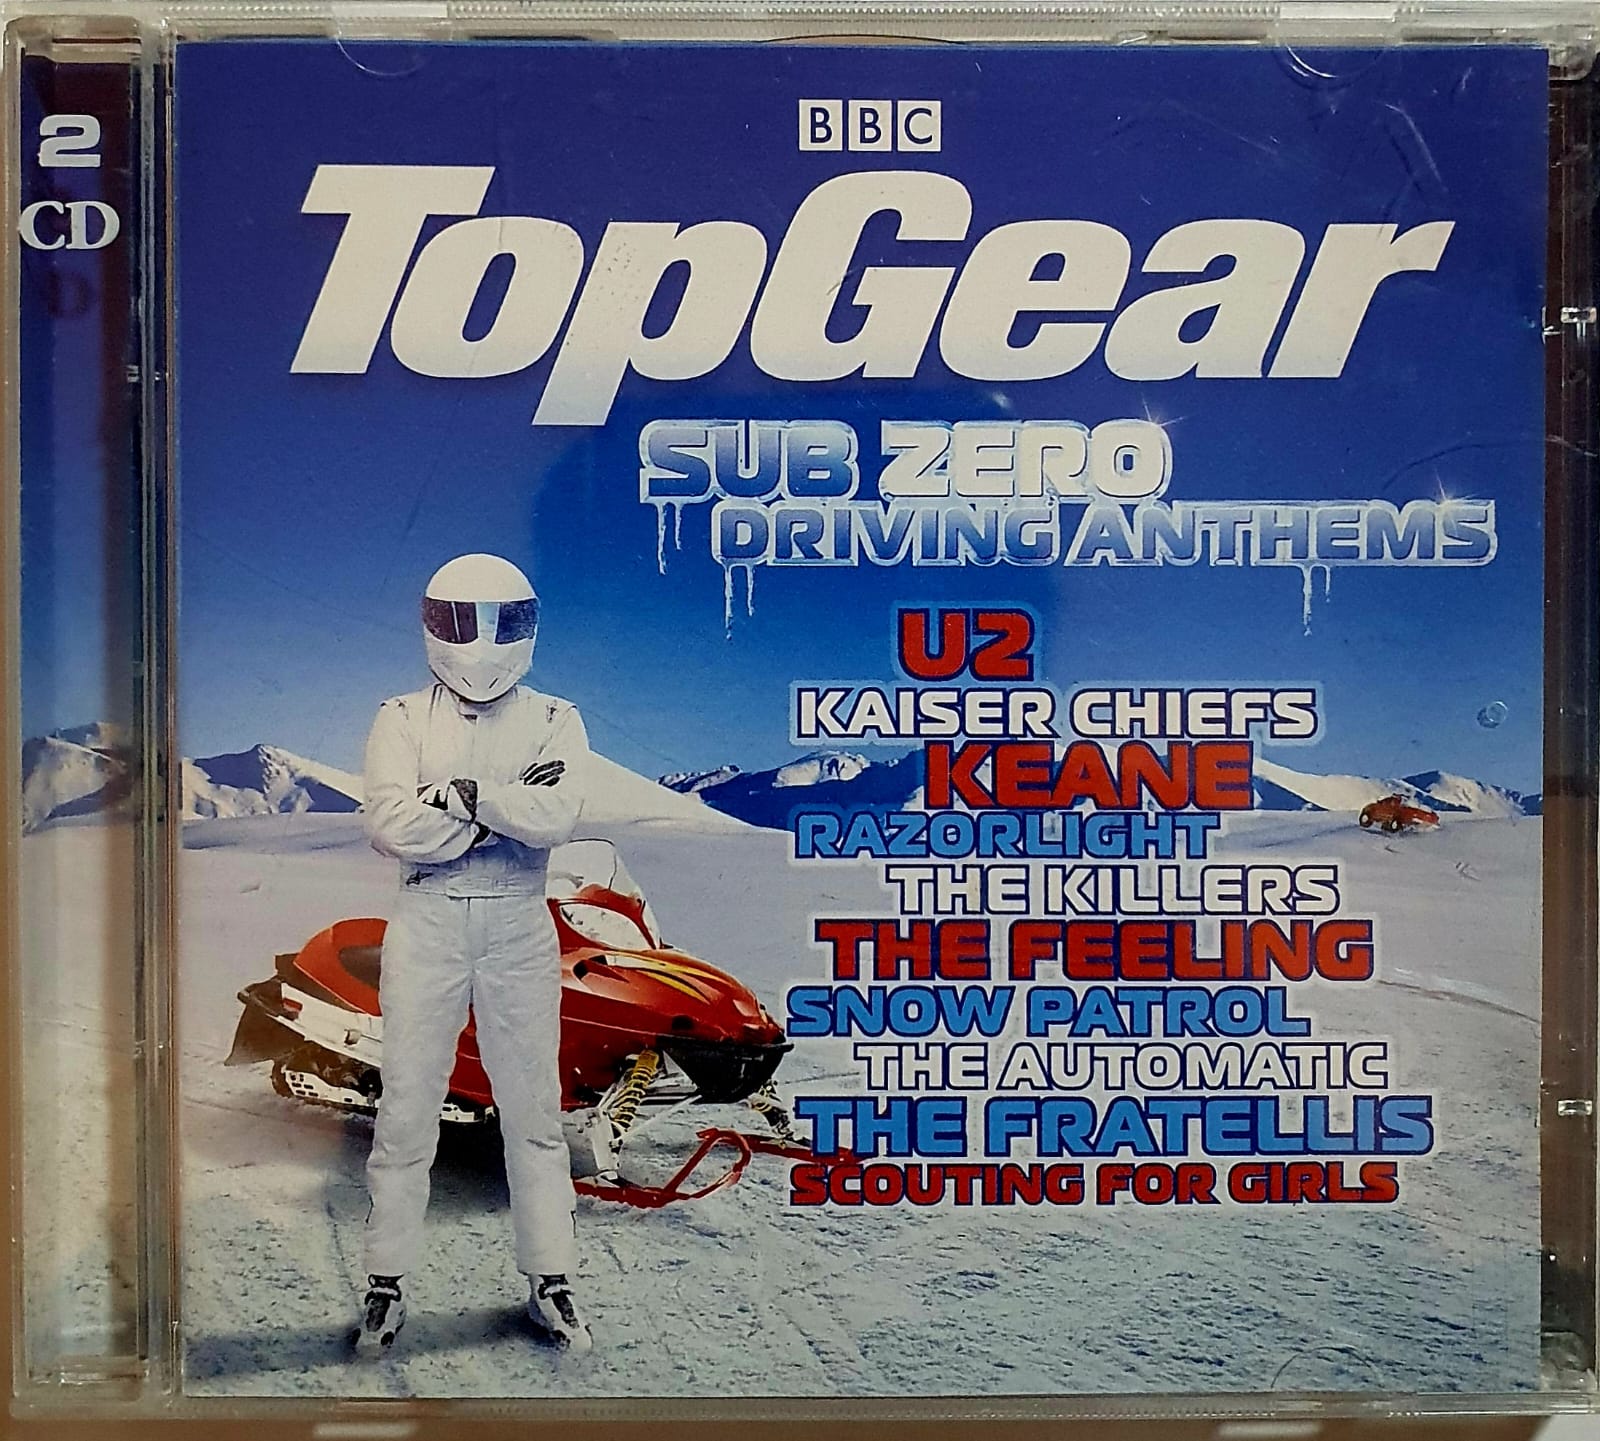 CD Compilado Top Gear Sub Zero Driving Anthems